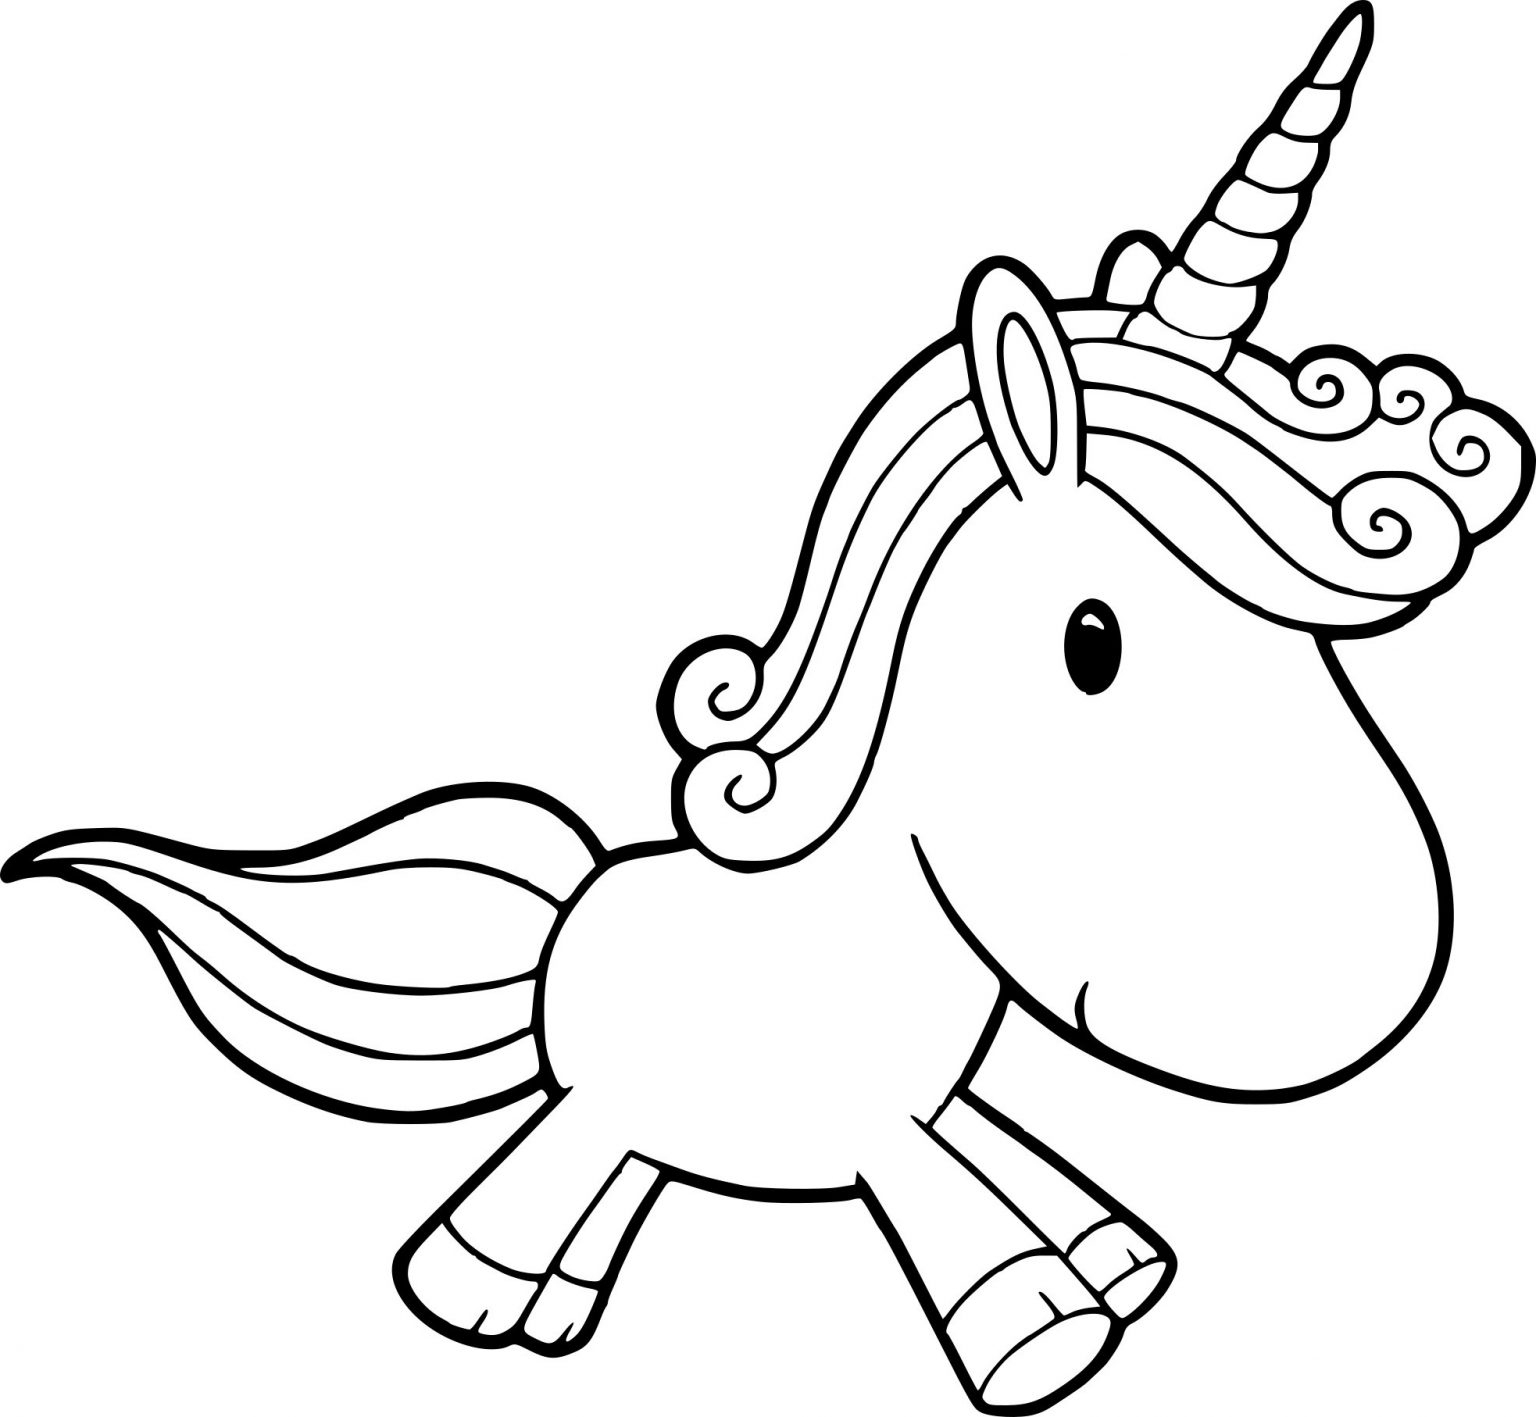 Licorne Kawaii A Colorier Luxe Collection Coloriage bei Coloriage Dessin Kawaii Licorne